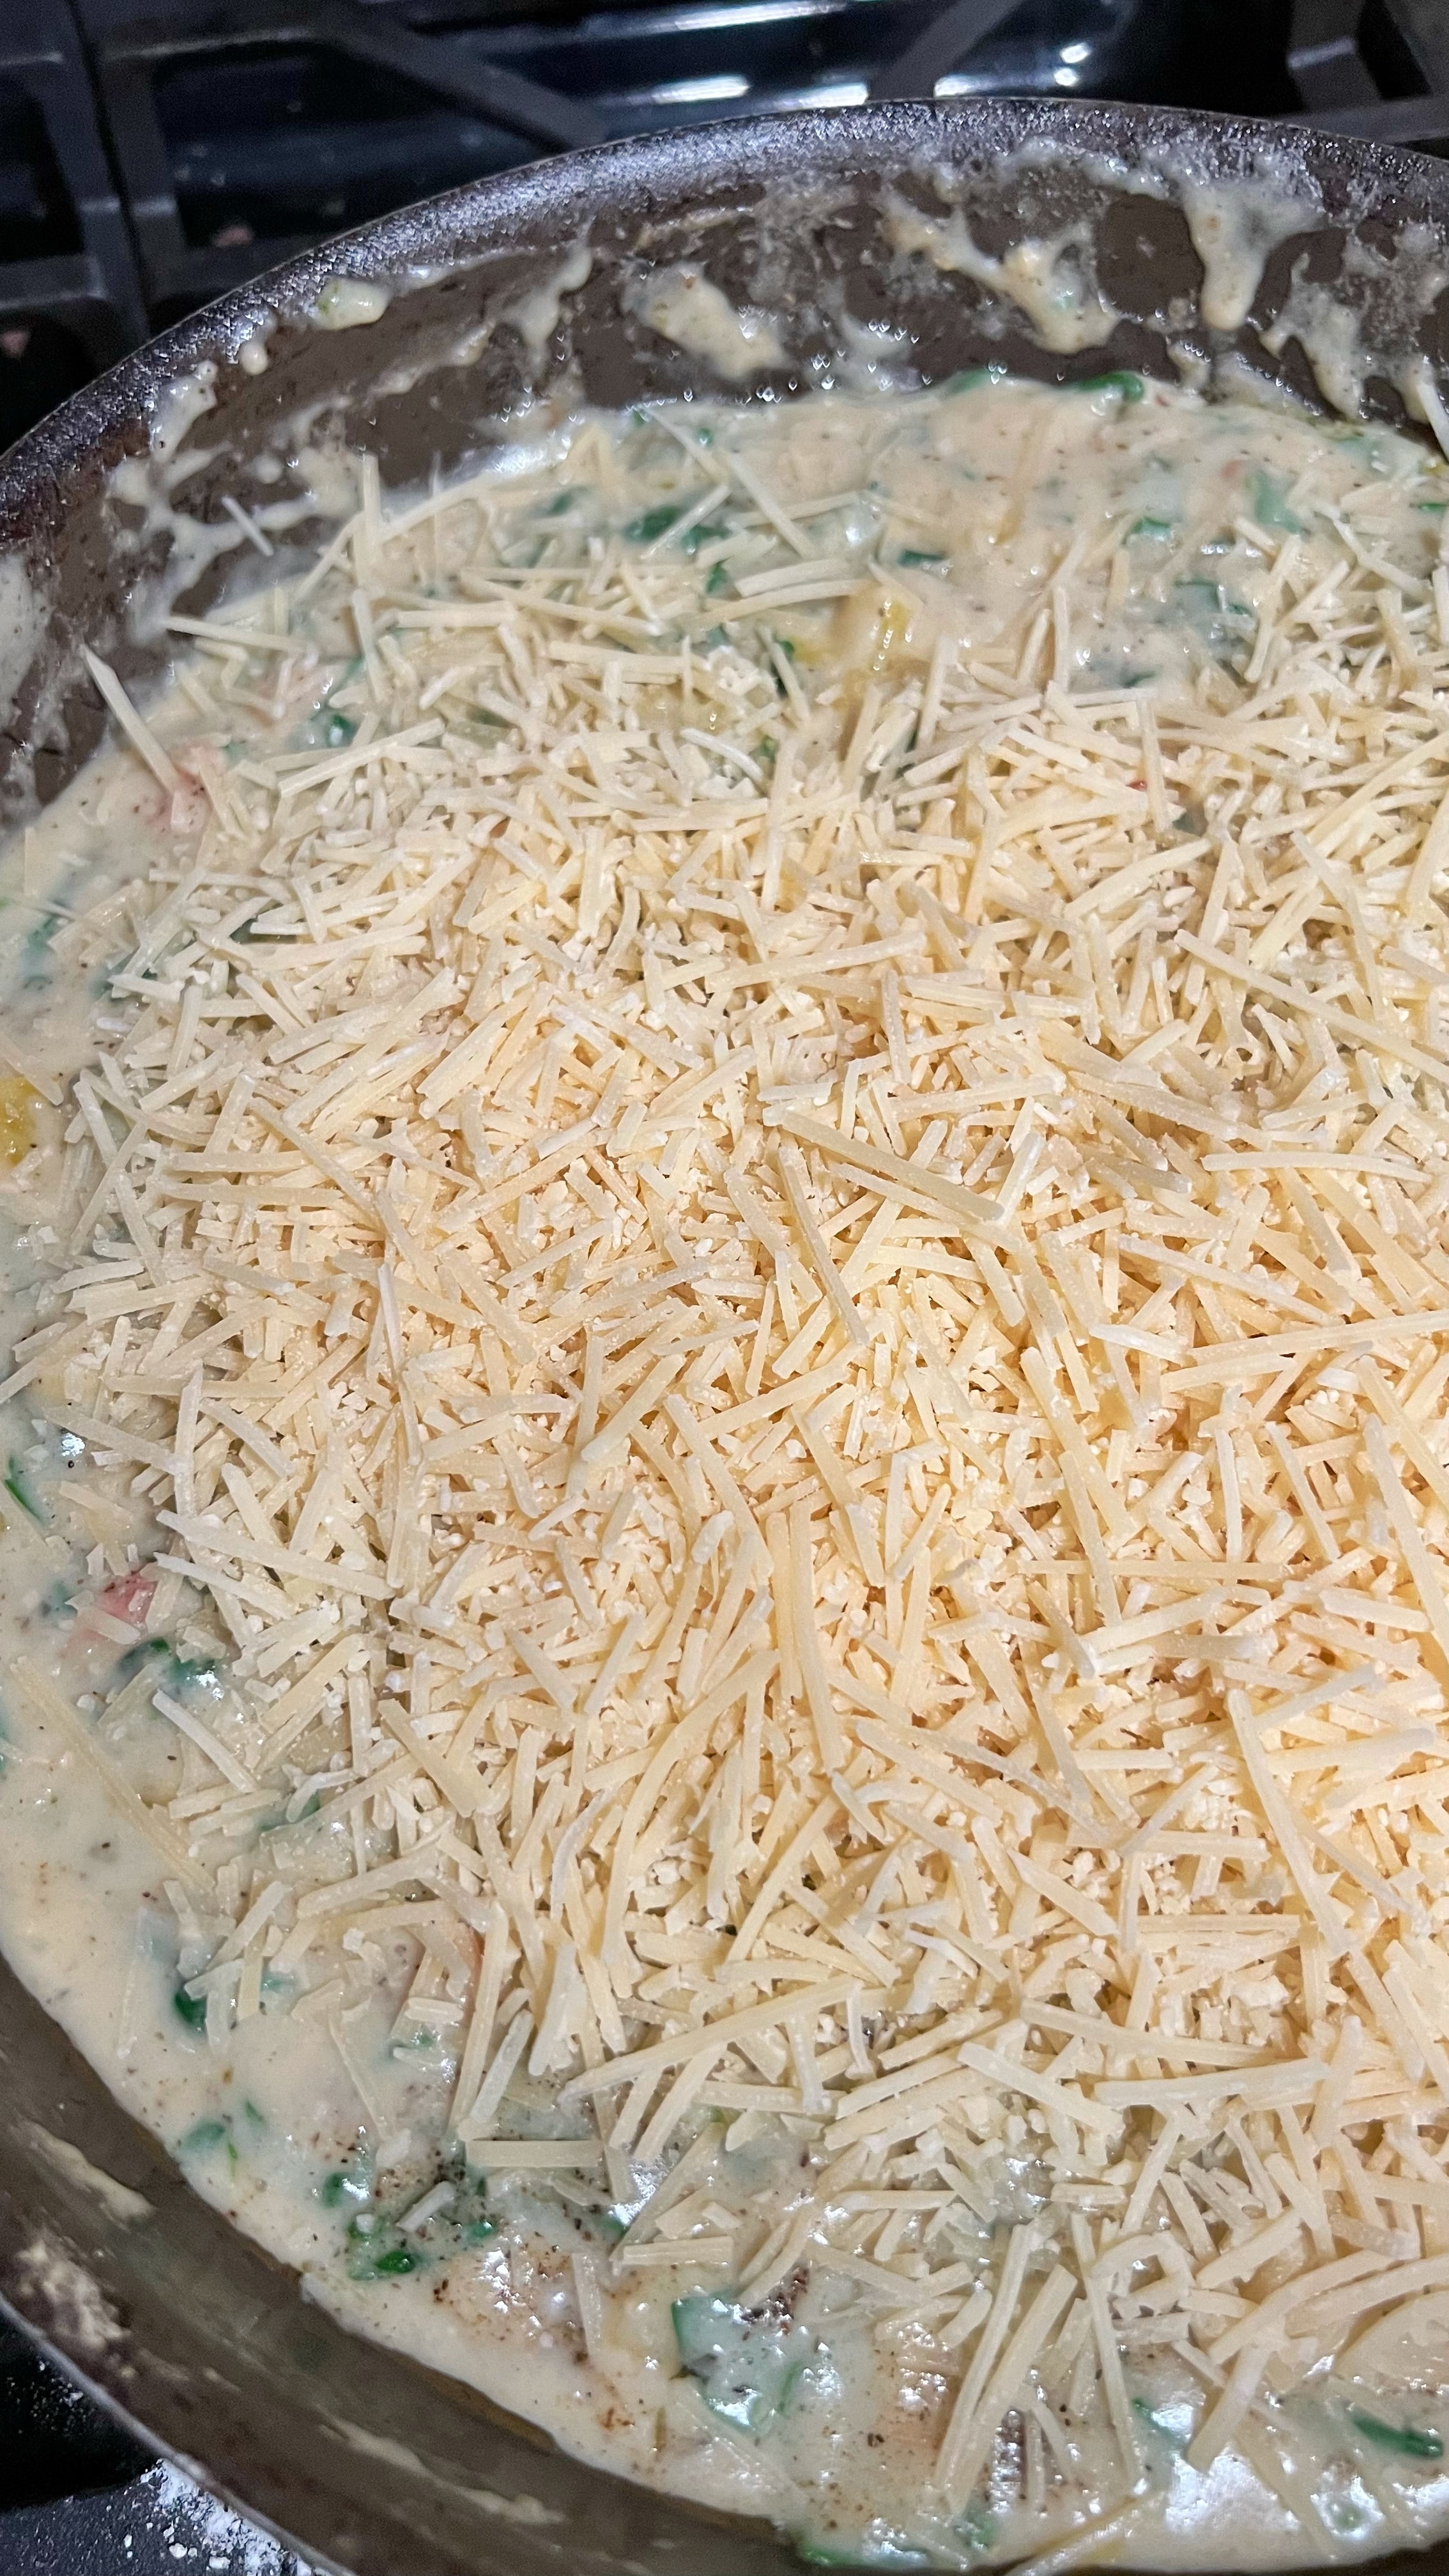 Shredded parmesan cheese added to Tuscan chicken sauce.